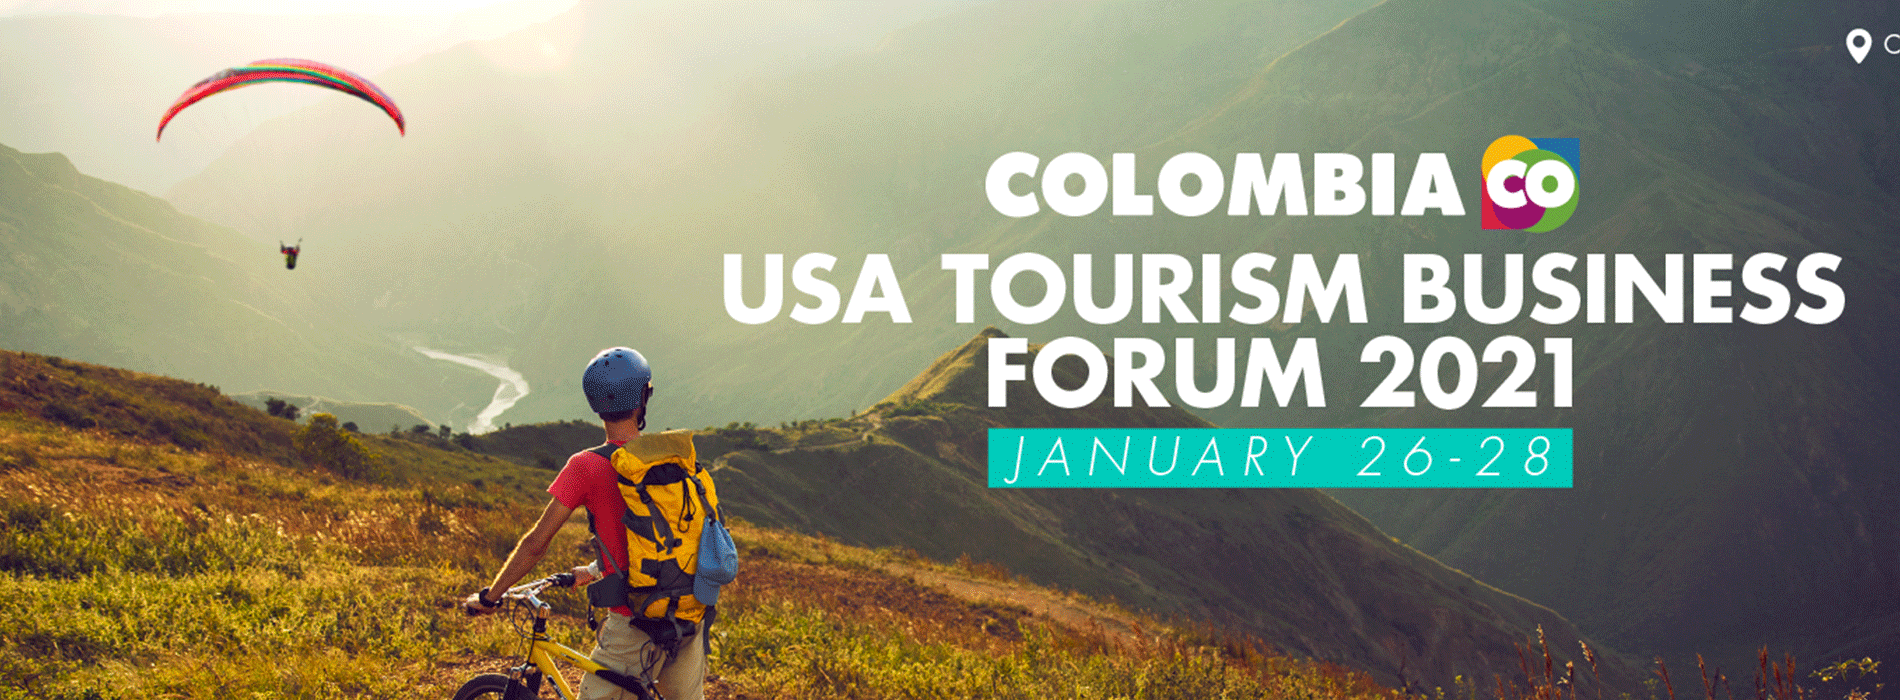 Colombia USA Tourism Business Forum banner